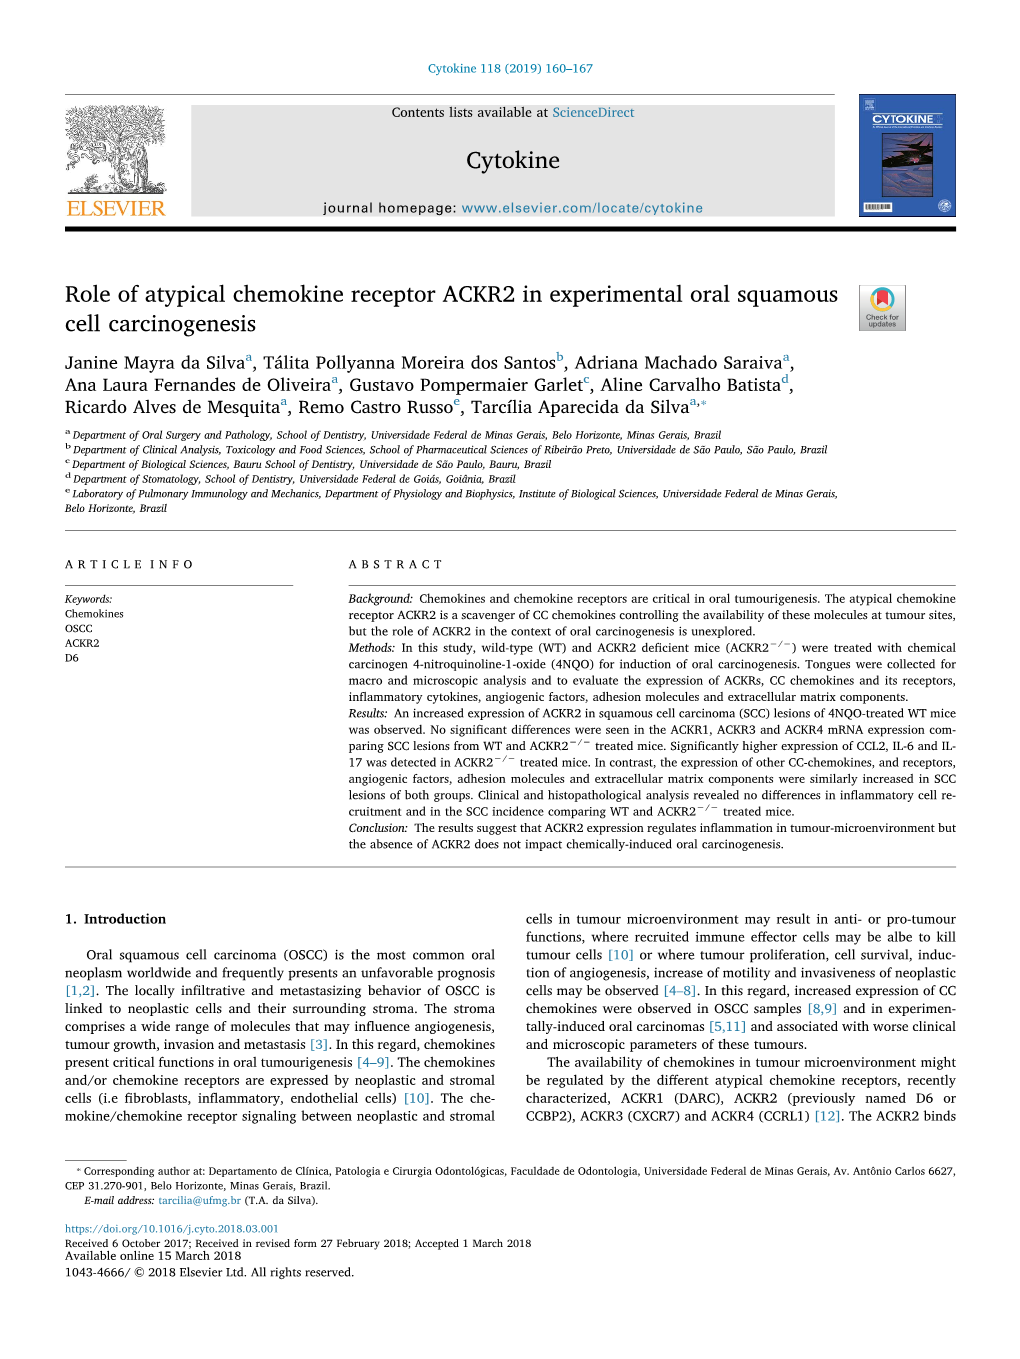 Role of Atypical Chemokine Receptor ACKR2 in Experimental Oral Squamous Cell Carcinogenesis T